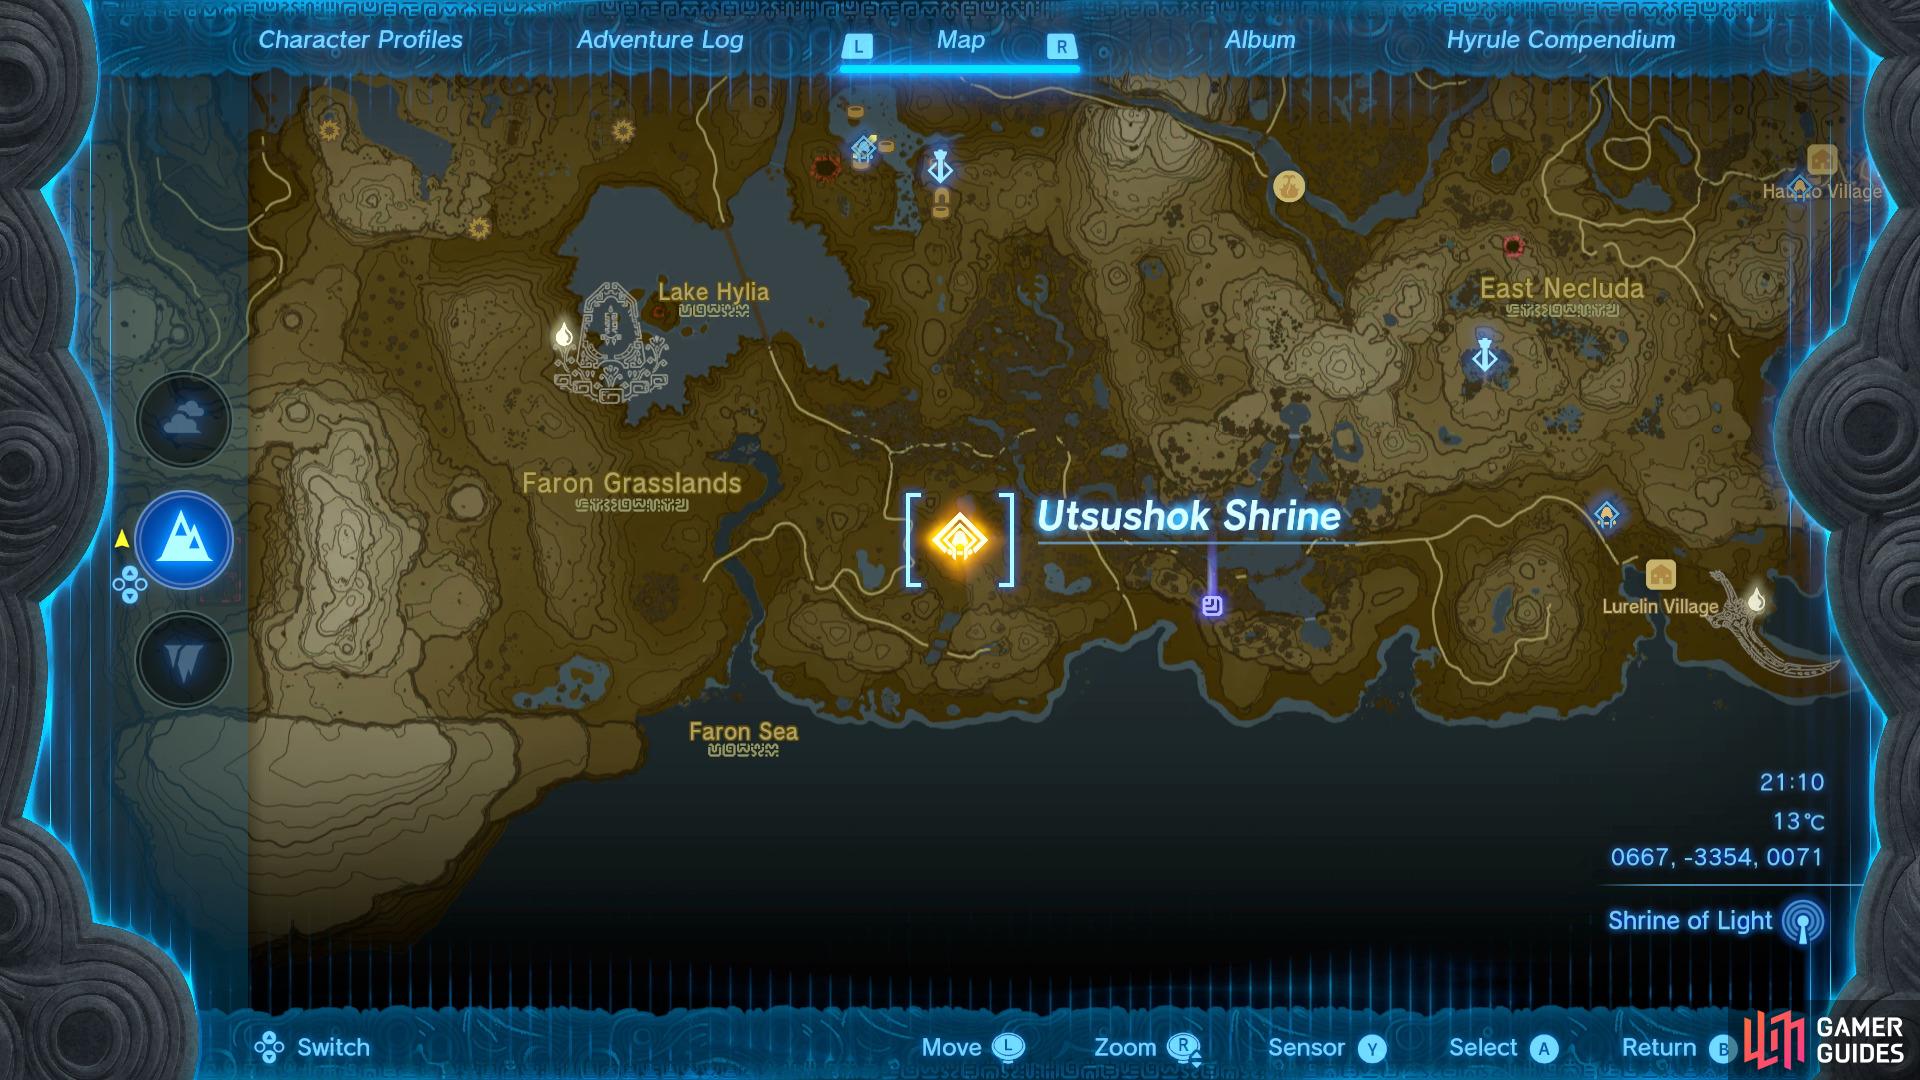 Head to this location on the map to find the Utsushok Shrine,